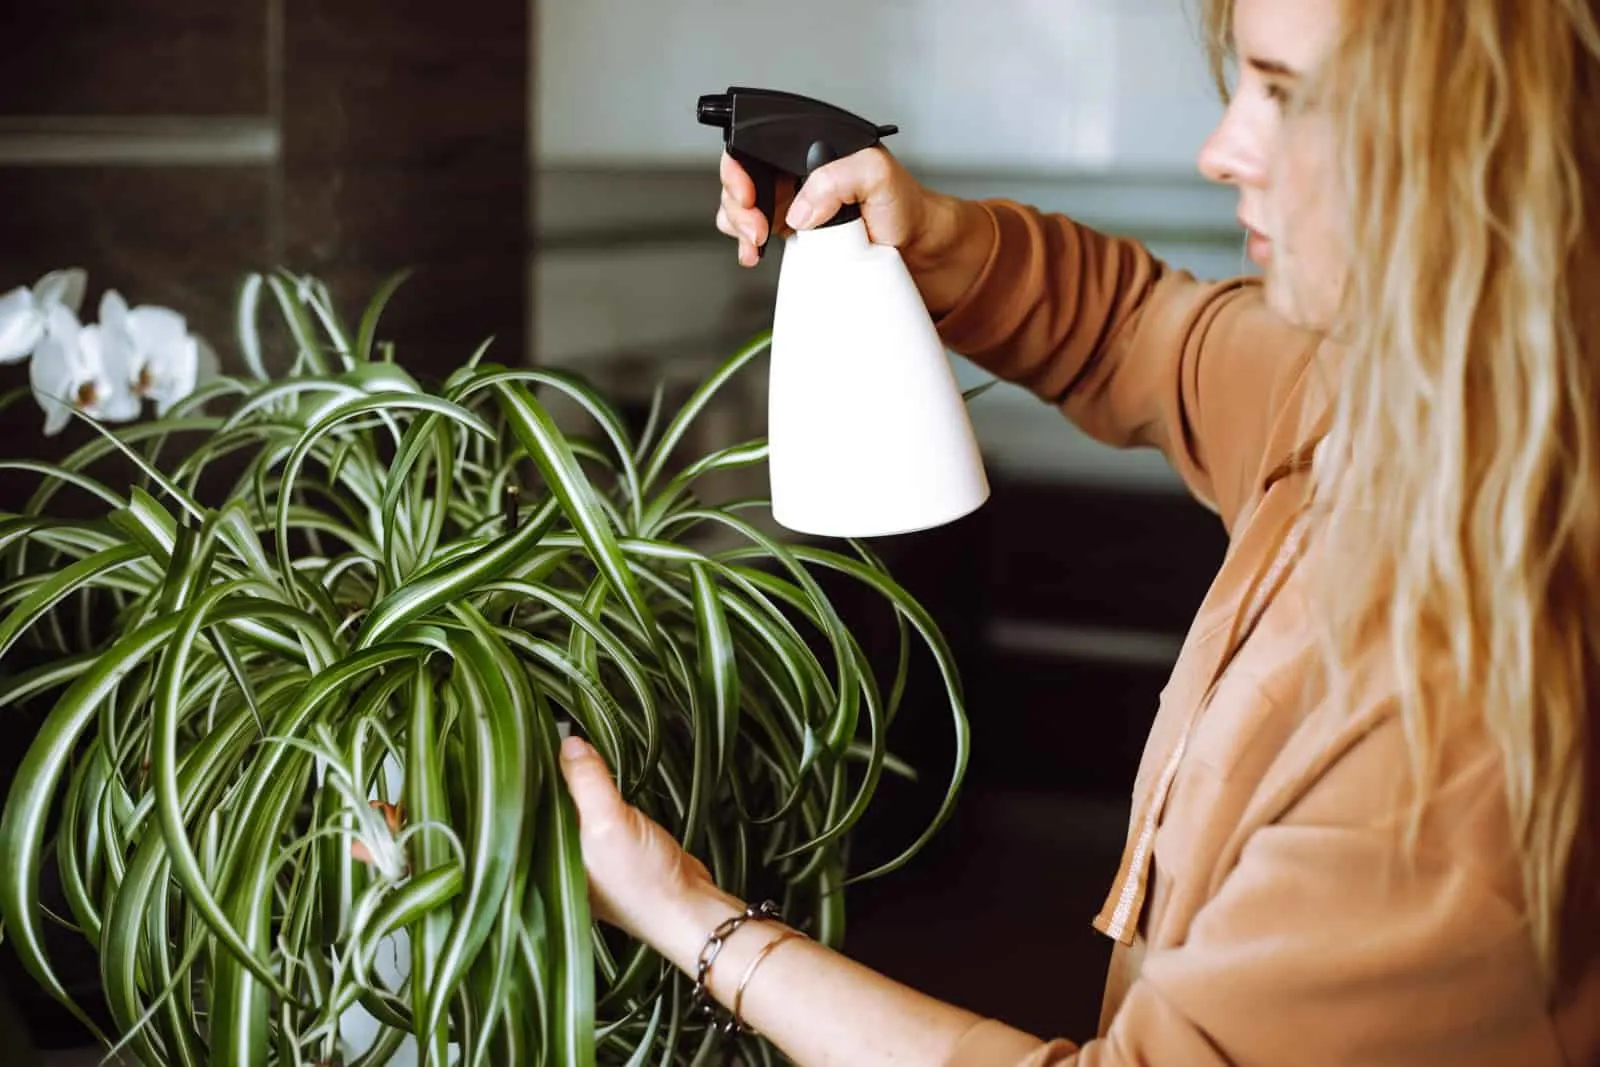 woman spray on green spider plant at home using a spray bottle